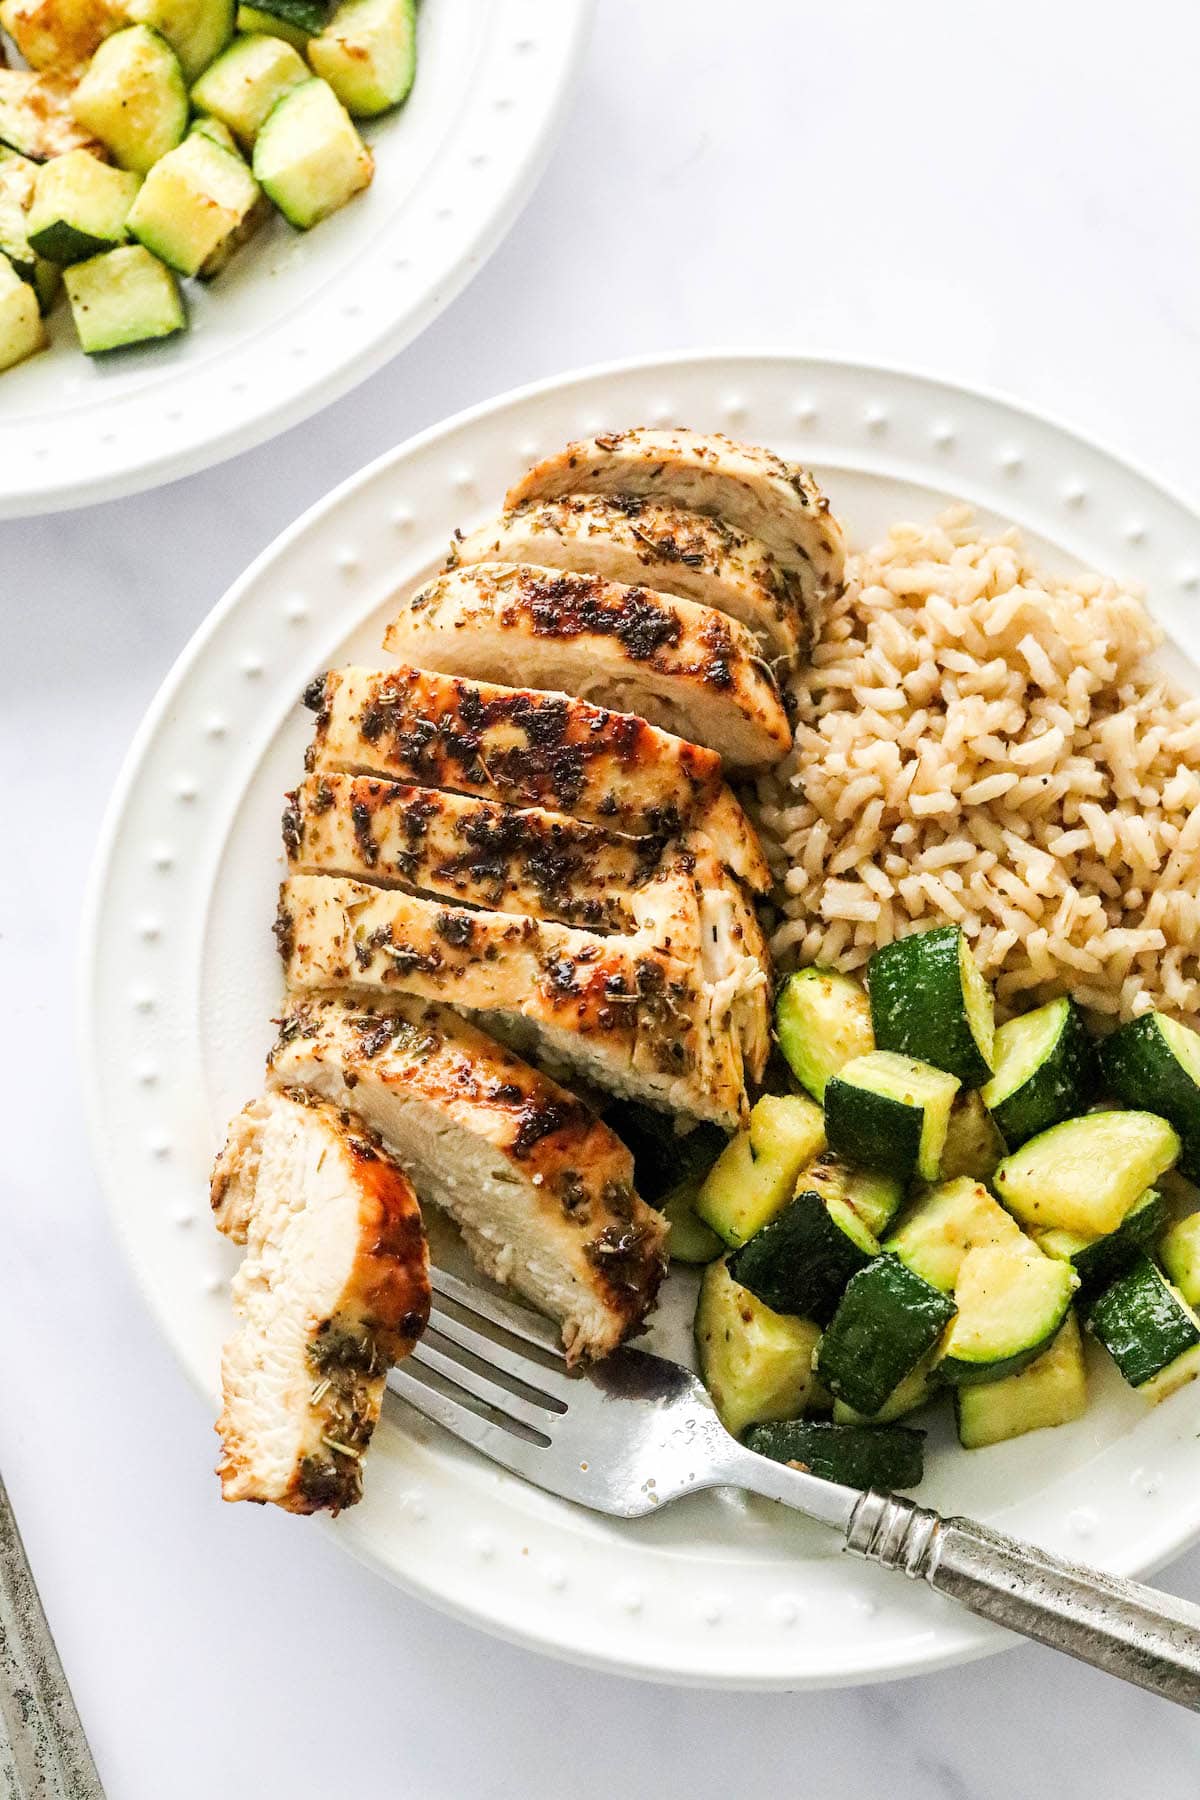 An air fryer chicken breast sliced and served on a plate with brown rice and zucchini. A fork rests on the plate with a piece of chicken.